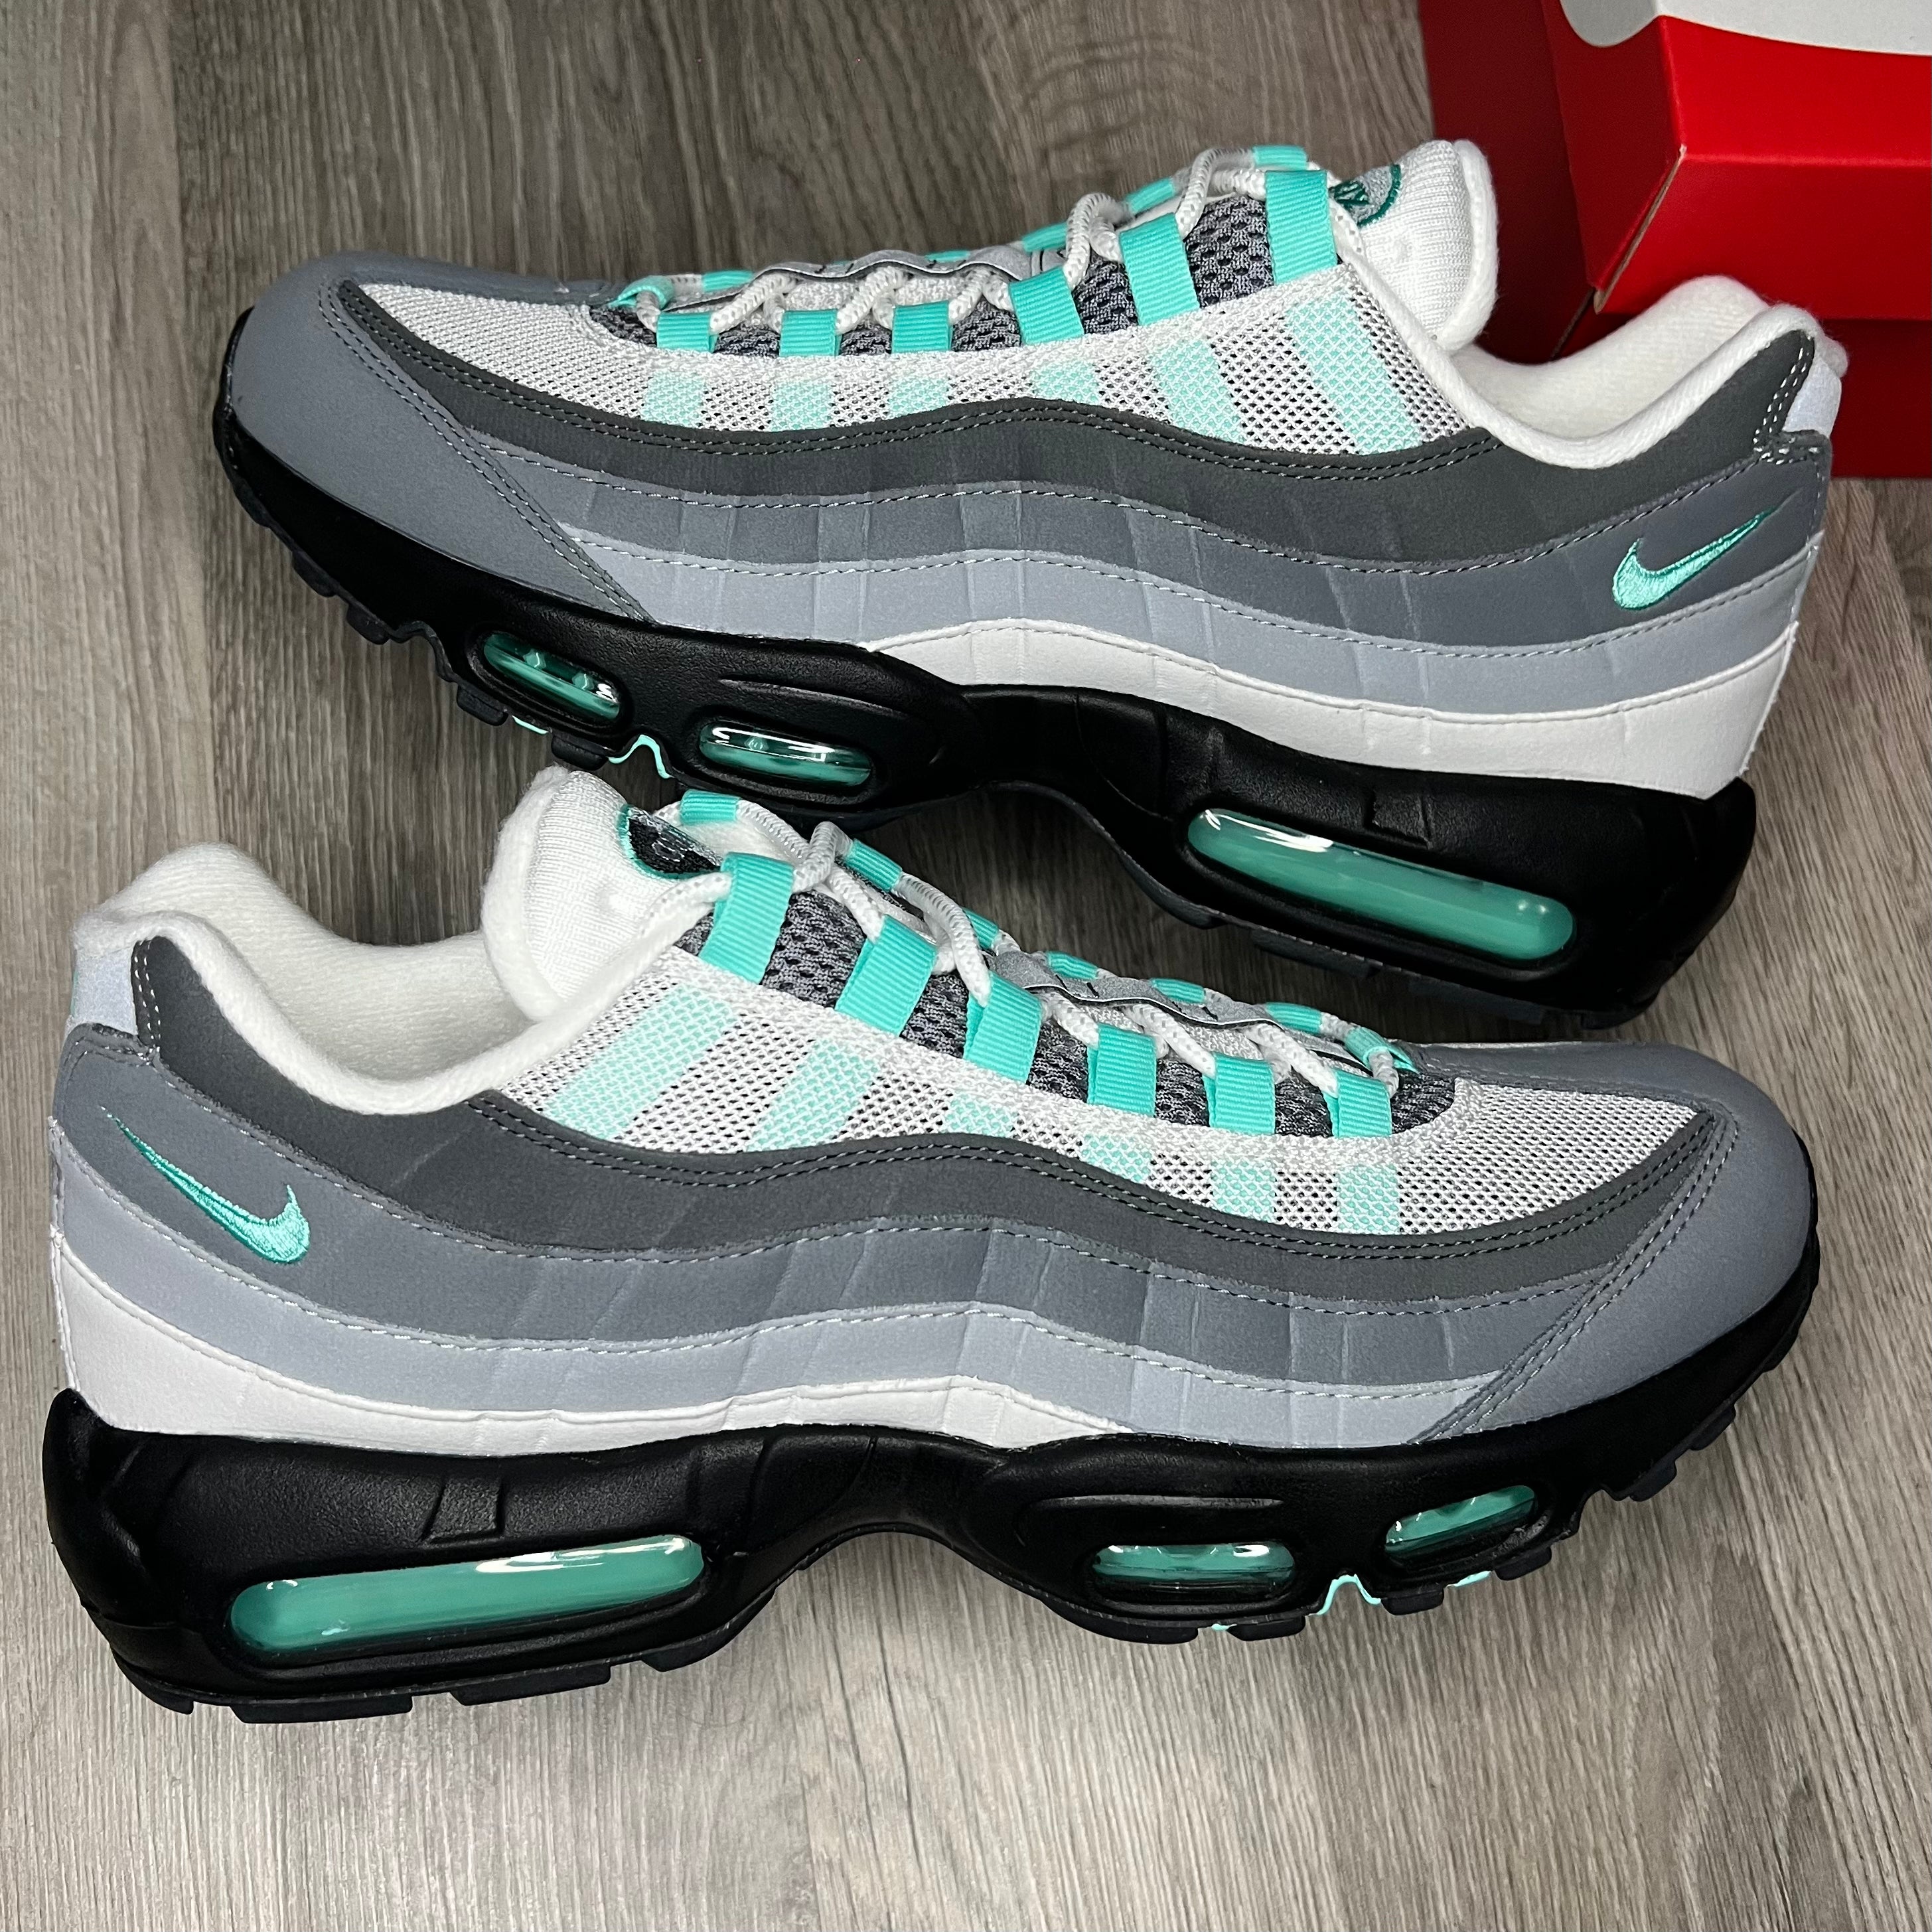 Nike Air Max 95 Hyper Turquoise – RESTOCK3D